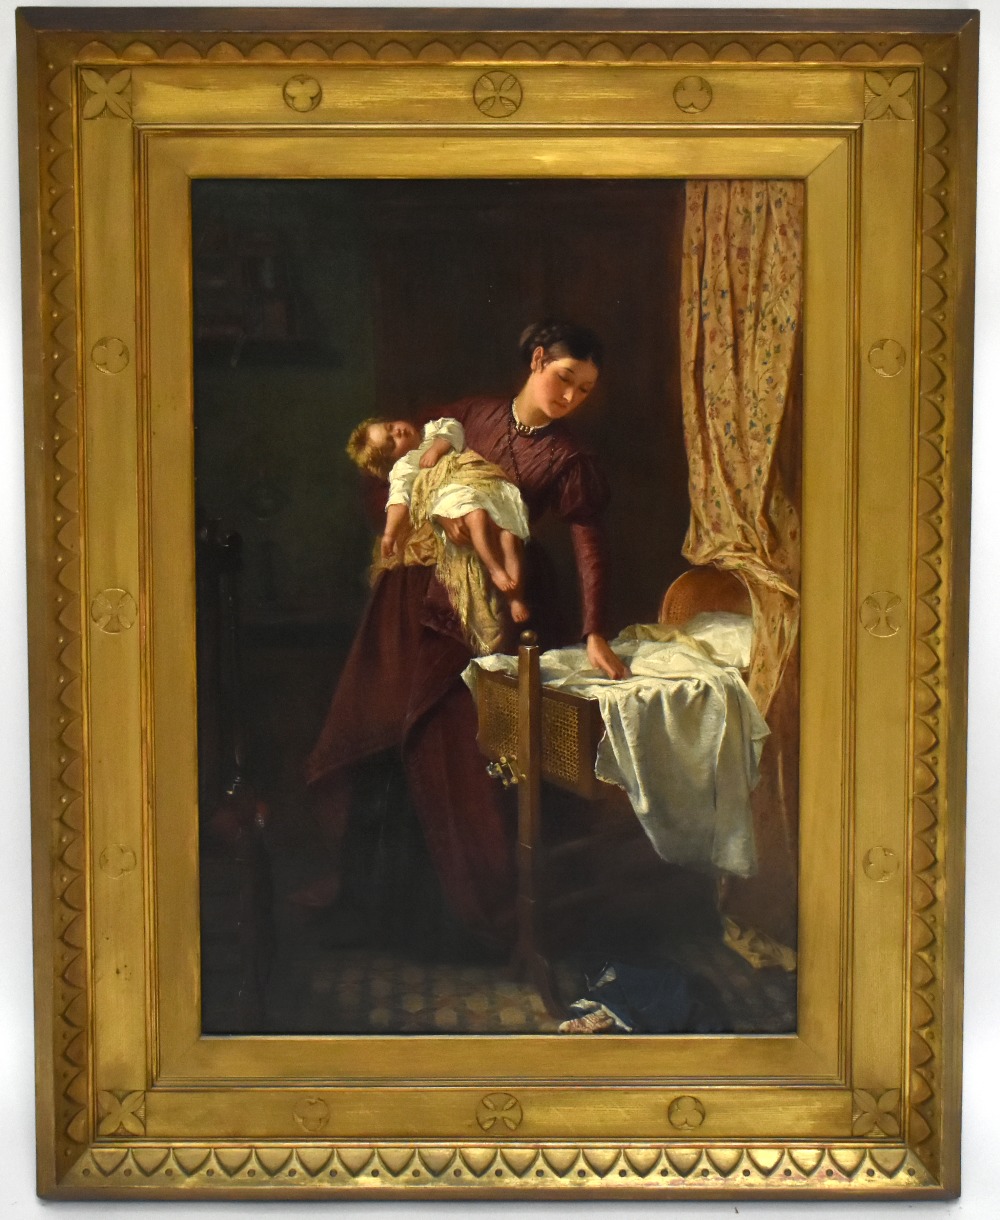 JAMES GOW; oil on canvas, depicting a mother cradling a child and placing her in a crib, signed